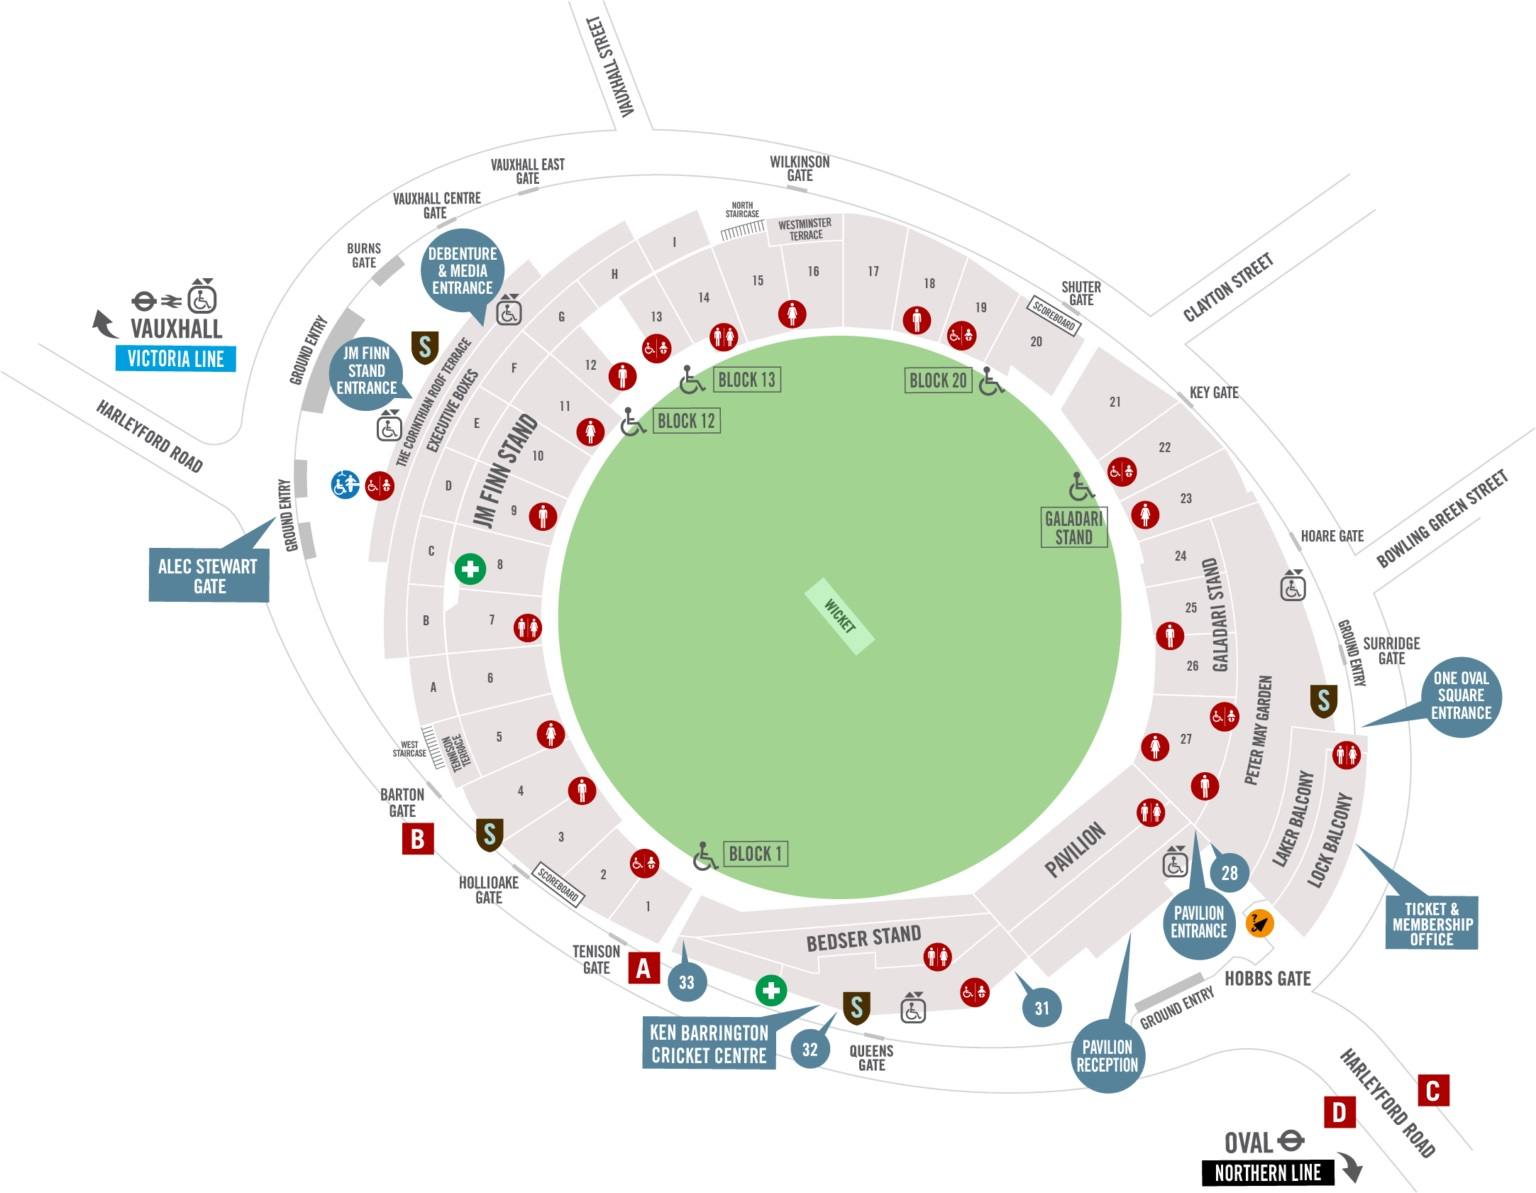 The Kia Oval Seating Plan with entry exit gates